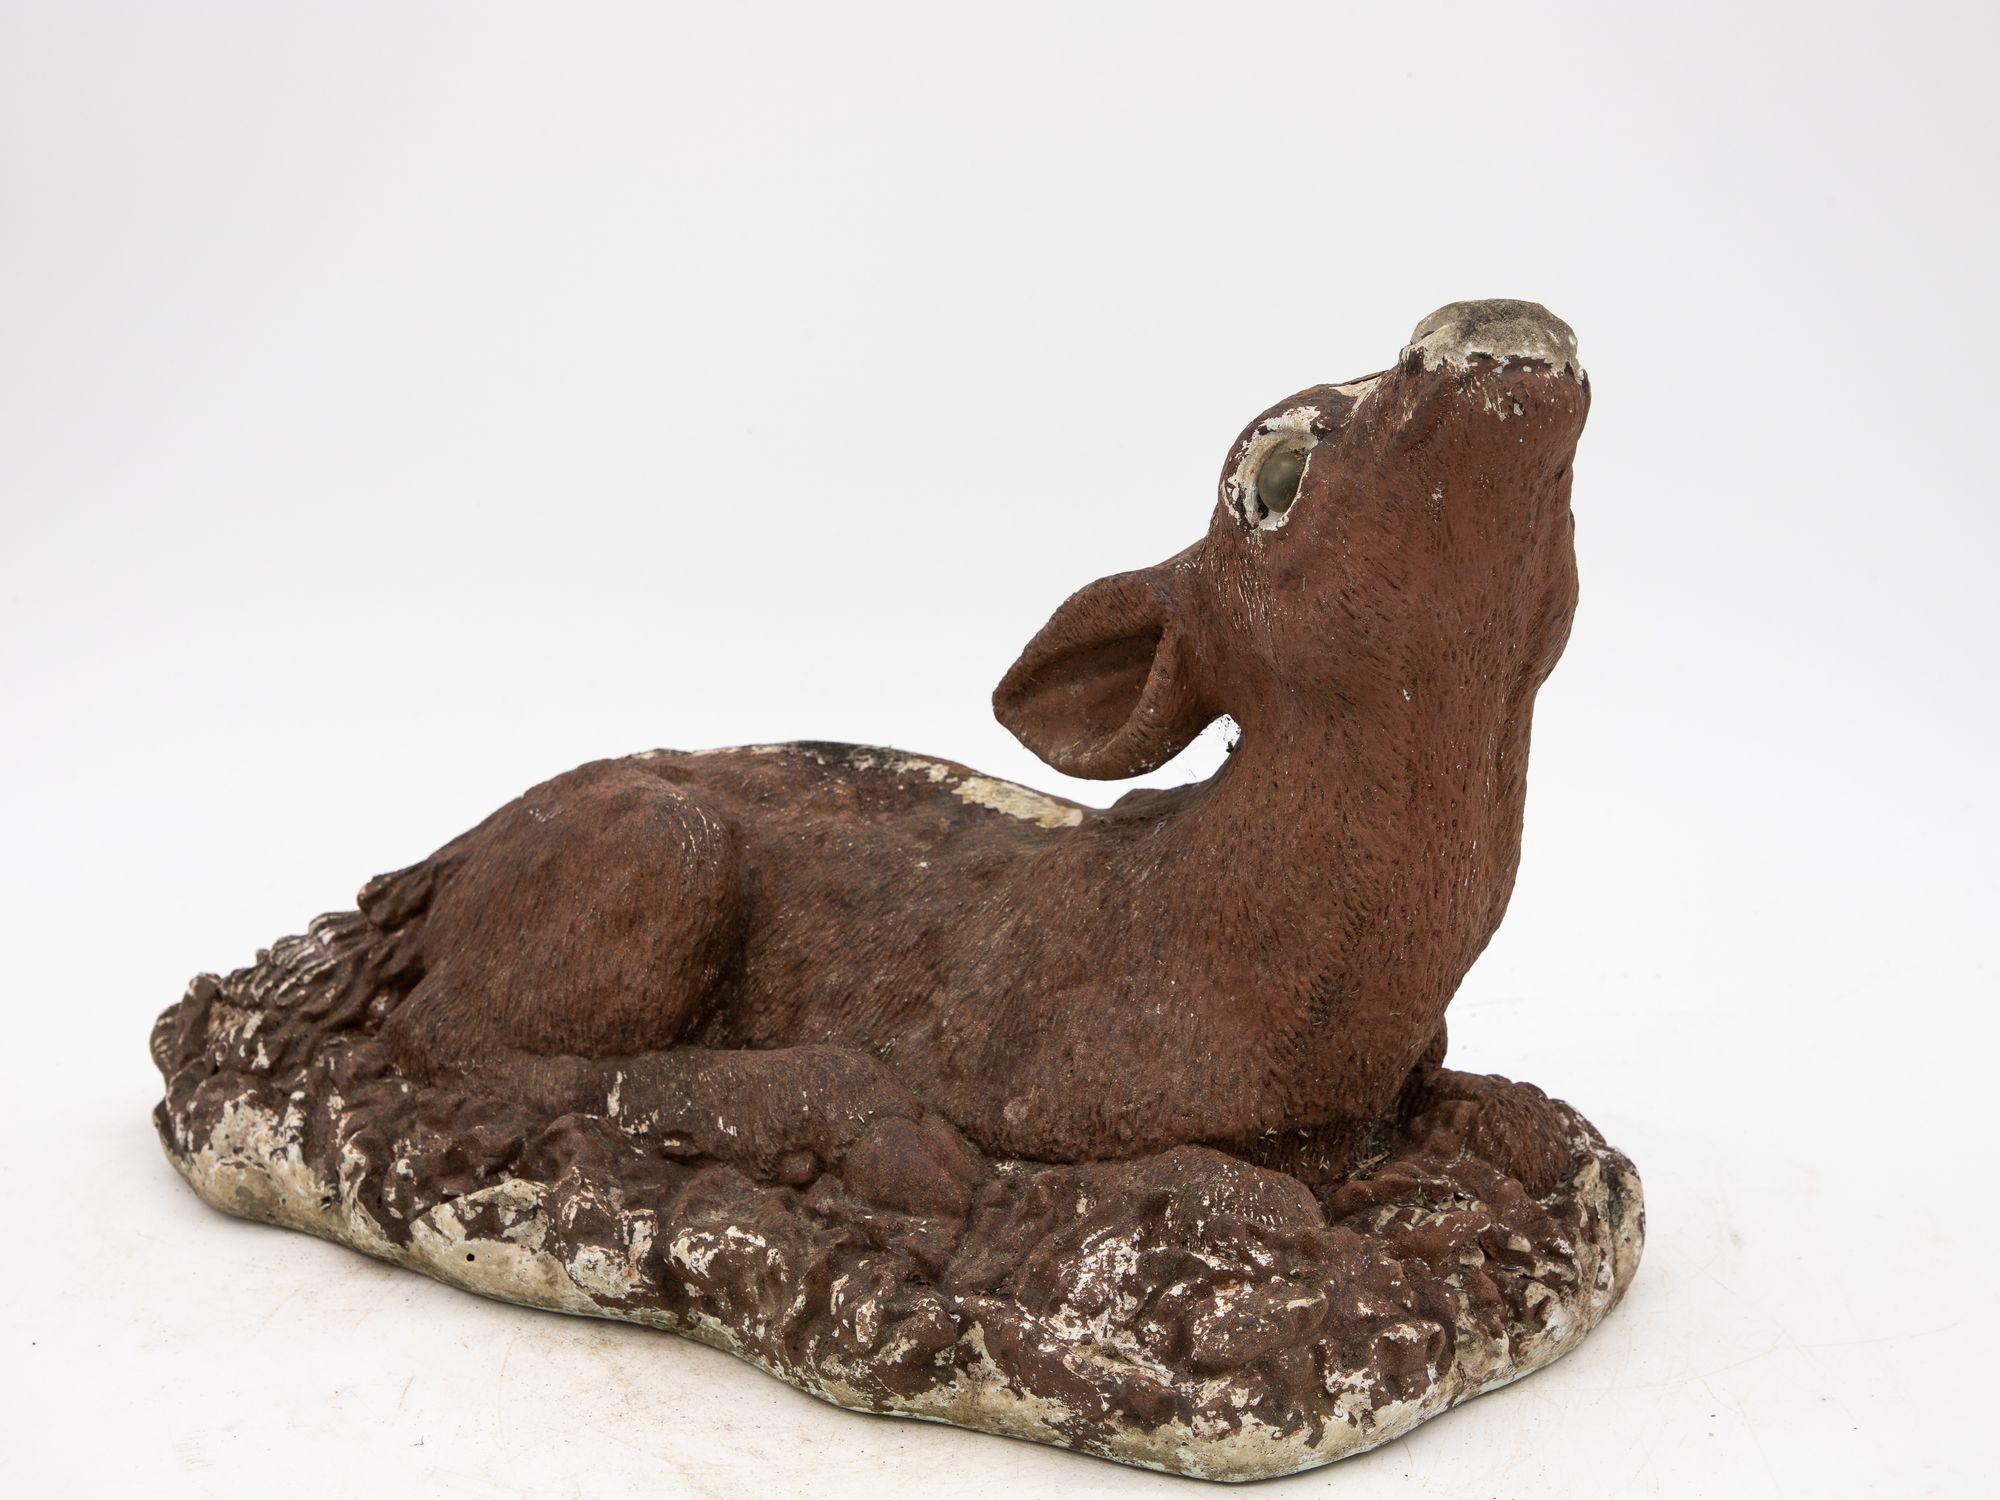 Transport yourself to the enchanting gardens of the mid-20th century with this exquisite French garden ornament in the shape of a fawn, doe or deer. Crafted with meticulous attention to detail and recreating a lifelike coat, this captivating